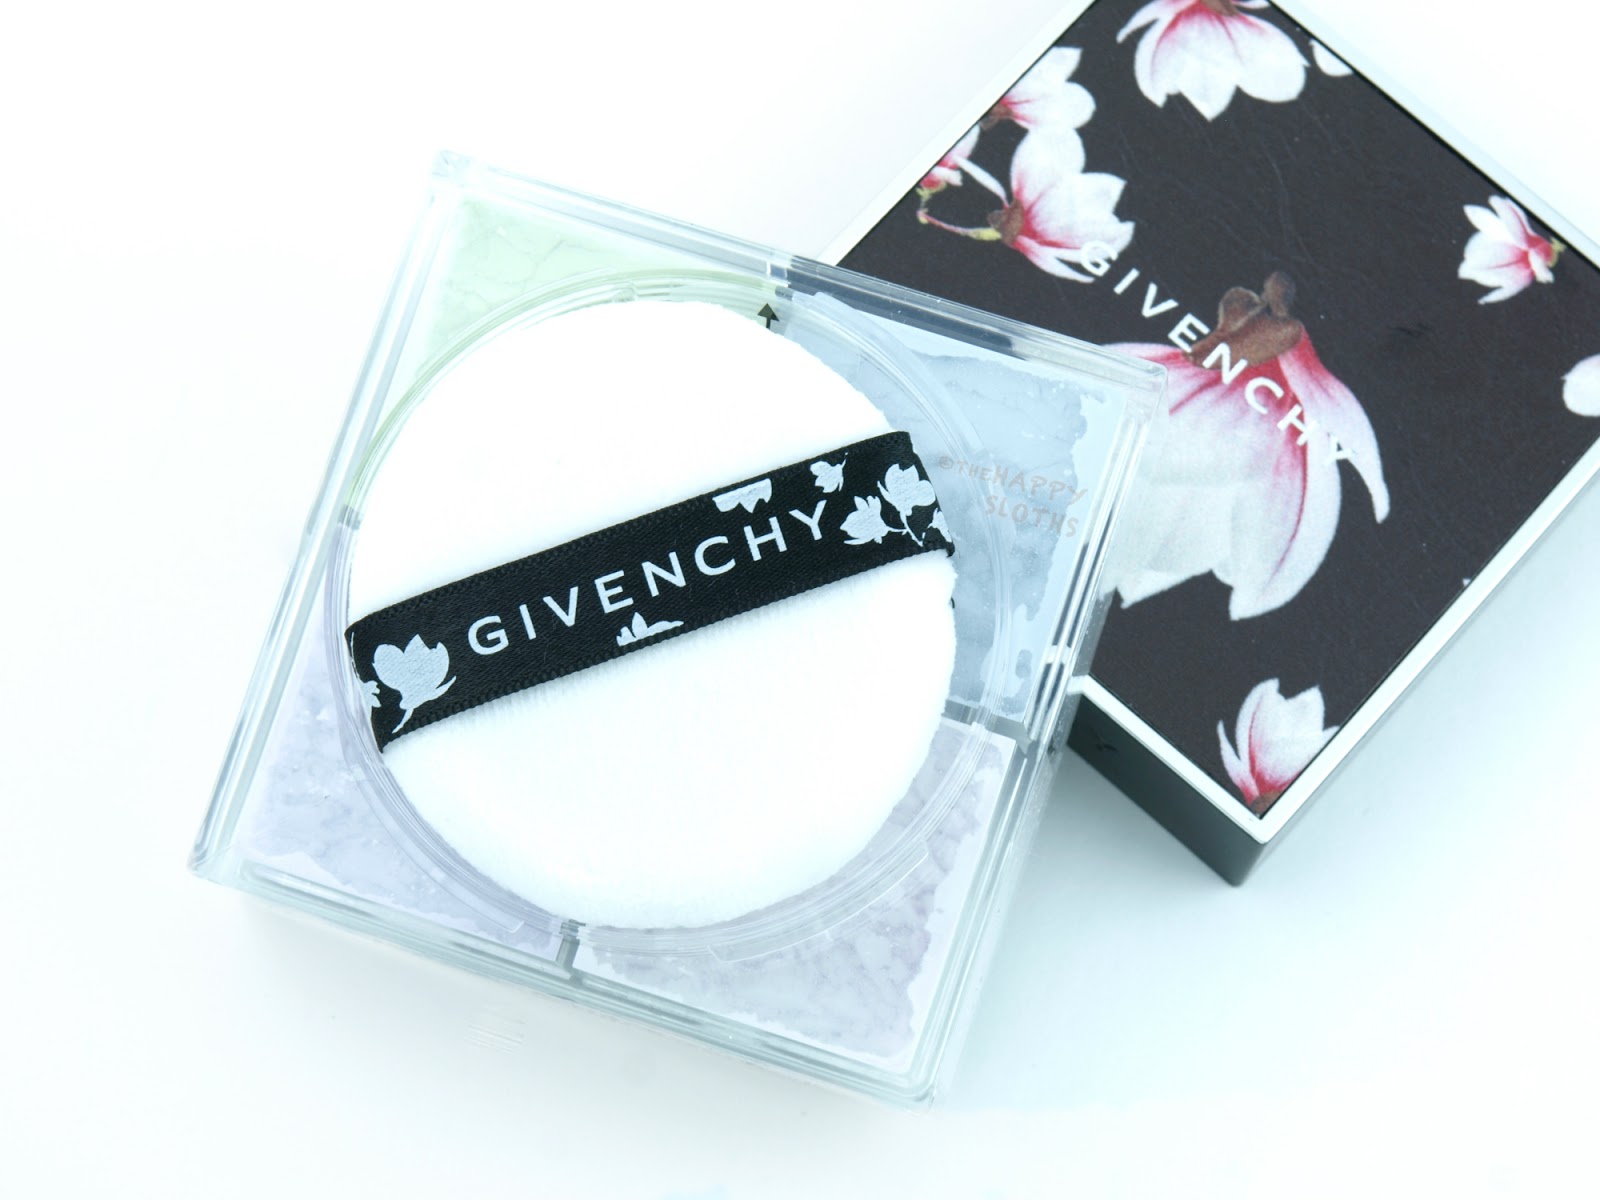 Givenchy 2016 Edition Couture Le Rouge Lipstick & Prisme Libre Loose Powder: Review and Swatches